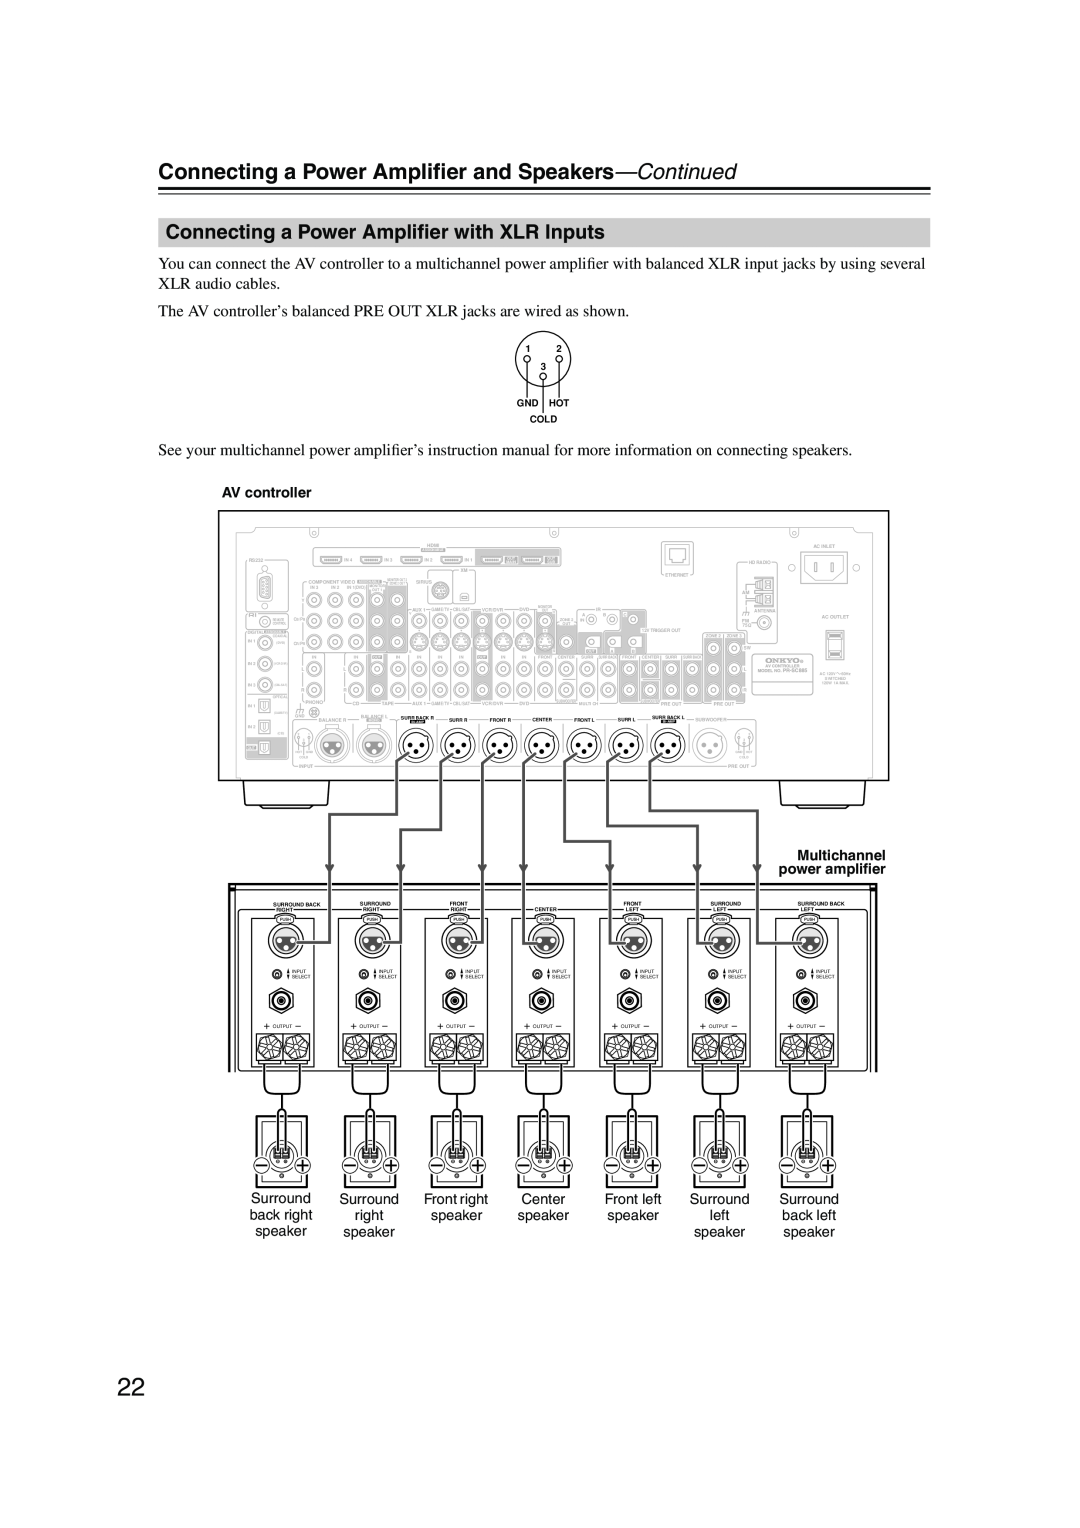 Onkyo PR-SC885 instruction manual Connecting a Power Ampliﬁer with XLR Inputs, Multichannel, power ampliﬁer 